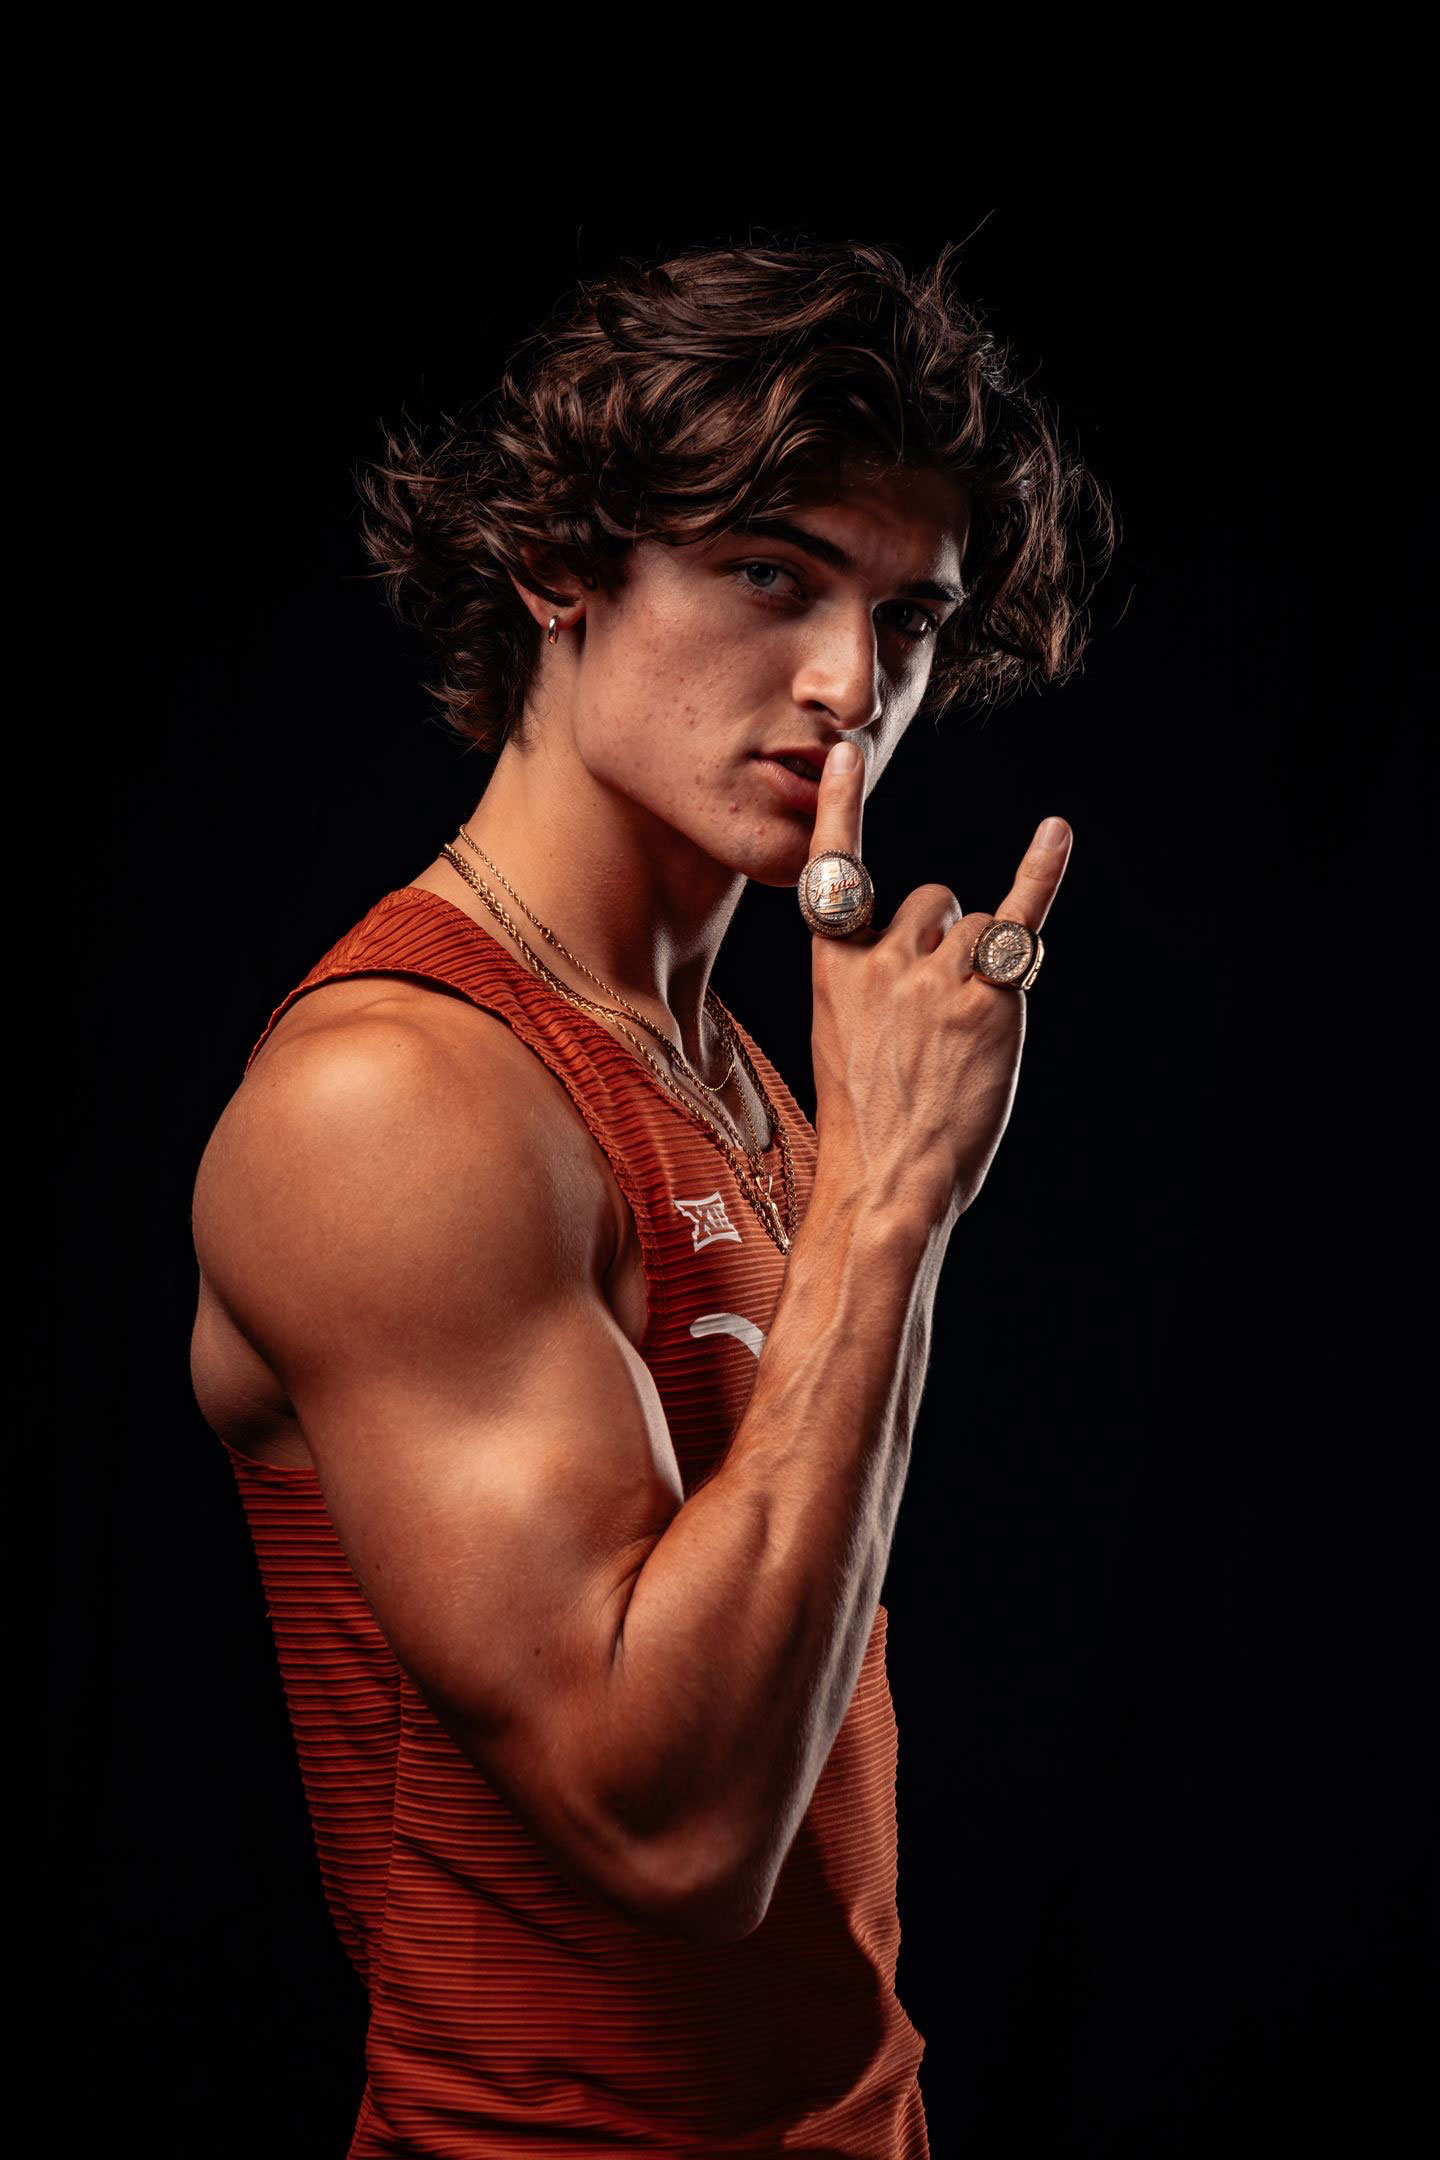 College athlete and influencer Sam Hurley wearing two championship rings for the University of Texas’ track and field team